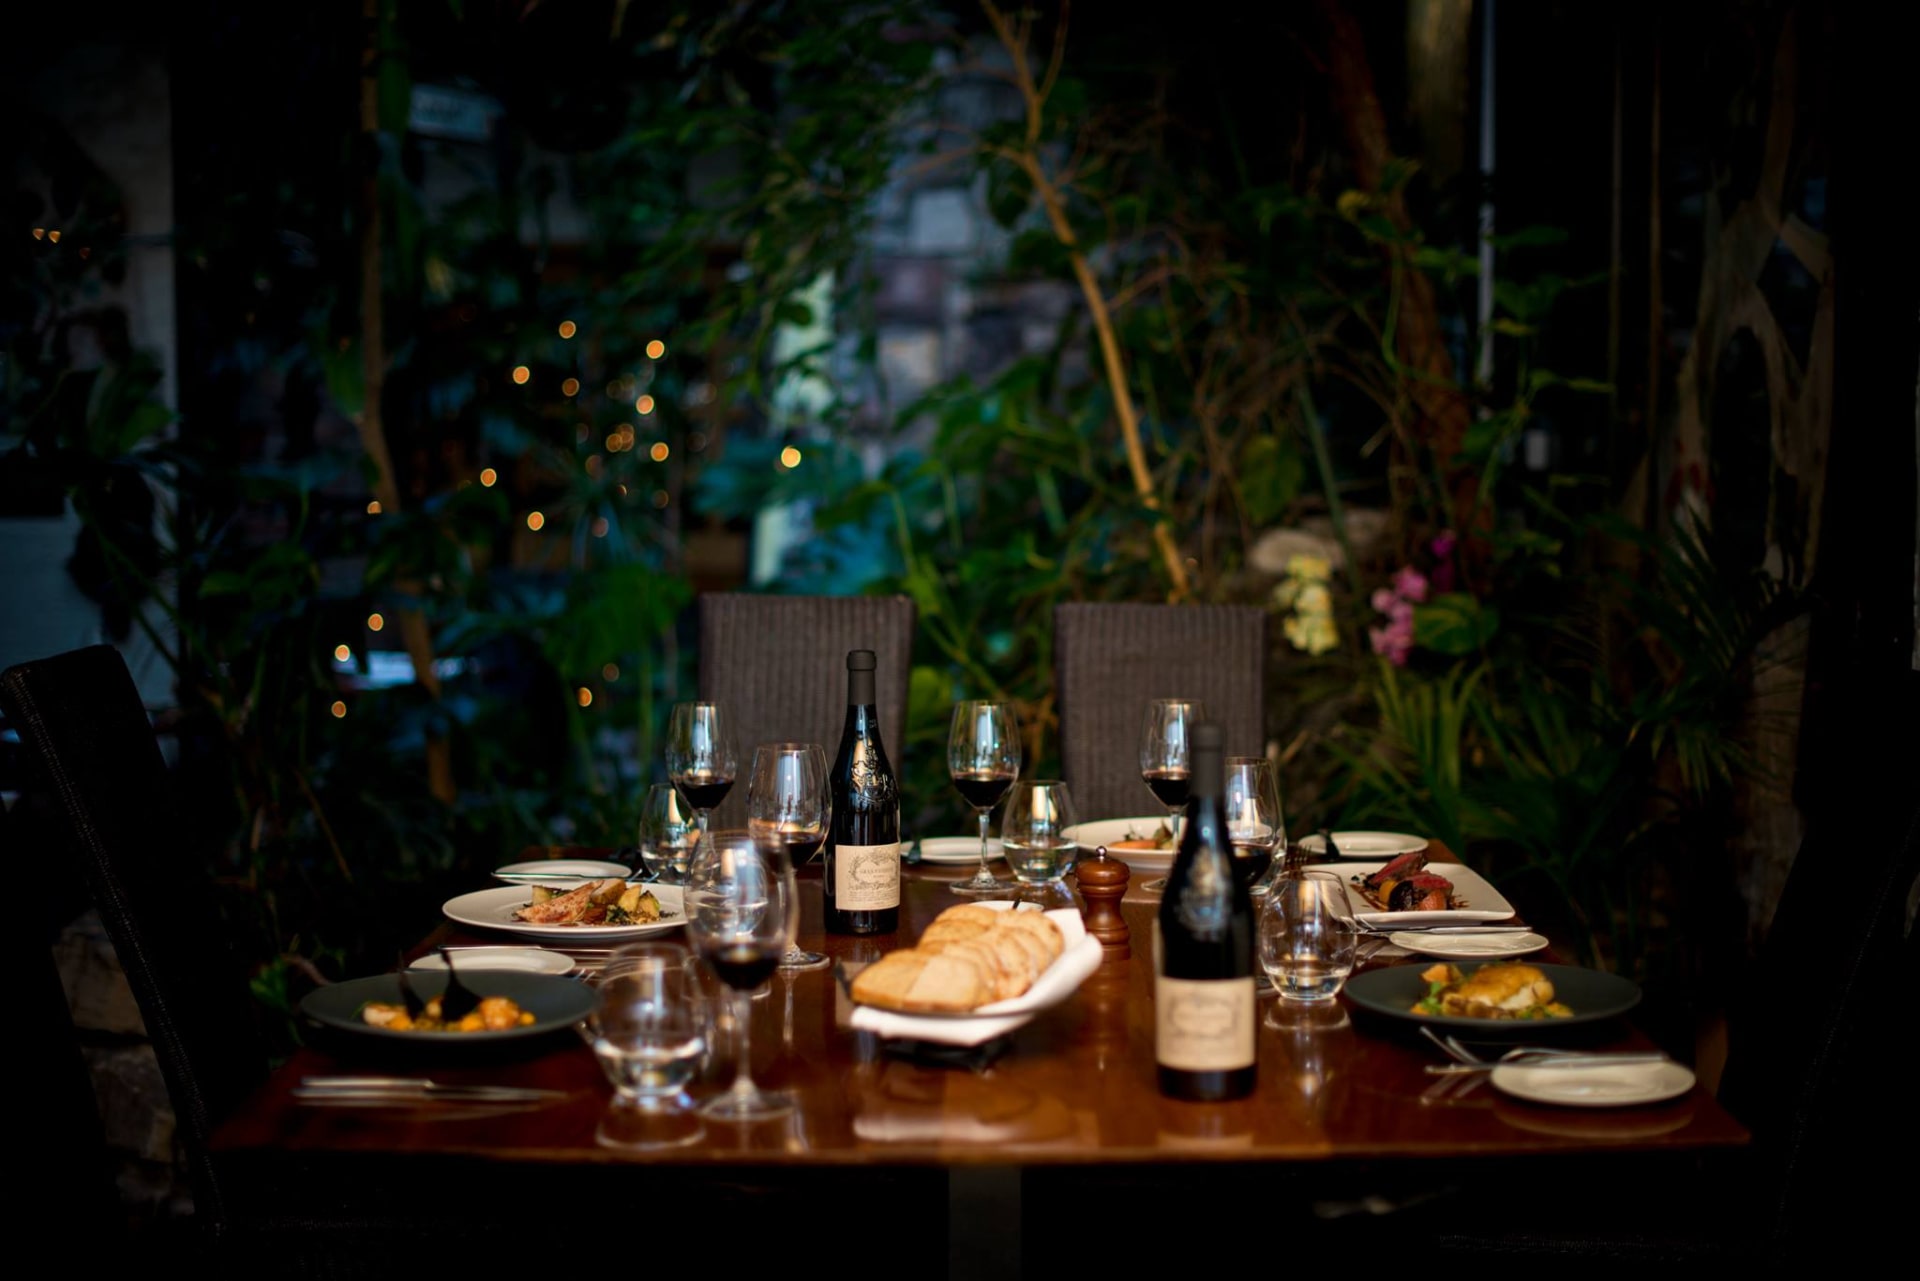 restaurant-table-with-plates-of-food-and-glasses-of-red-wine-in-leafy-setting-with-plants-ubiquitous-chip-glasgow